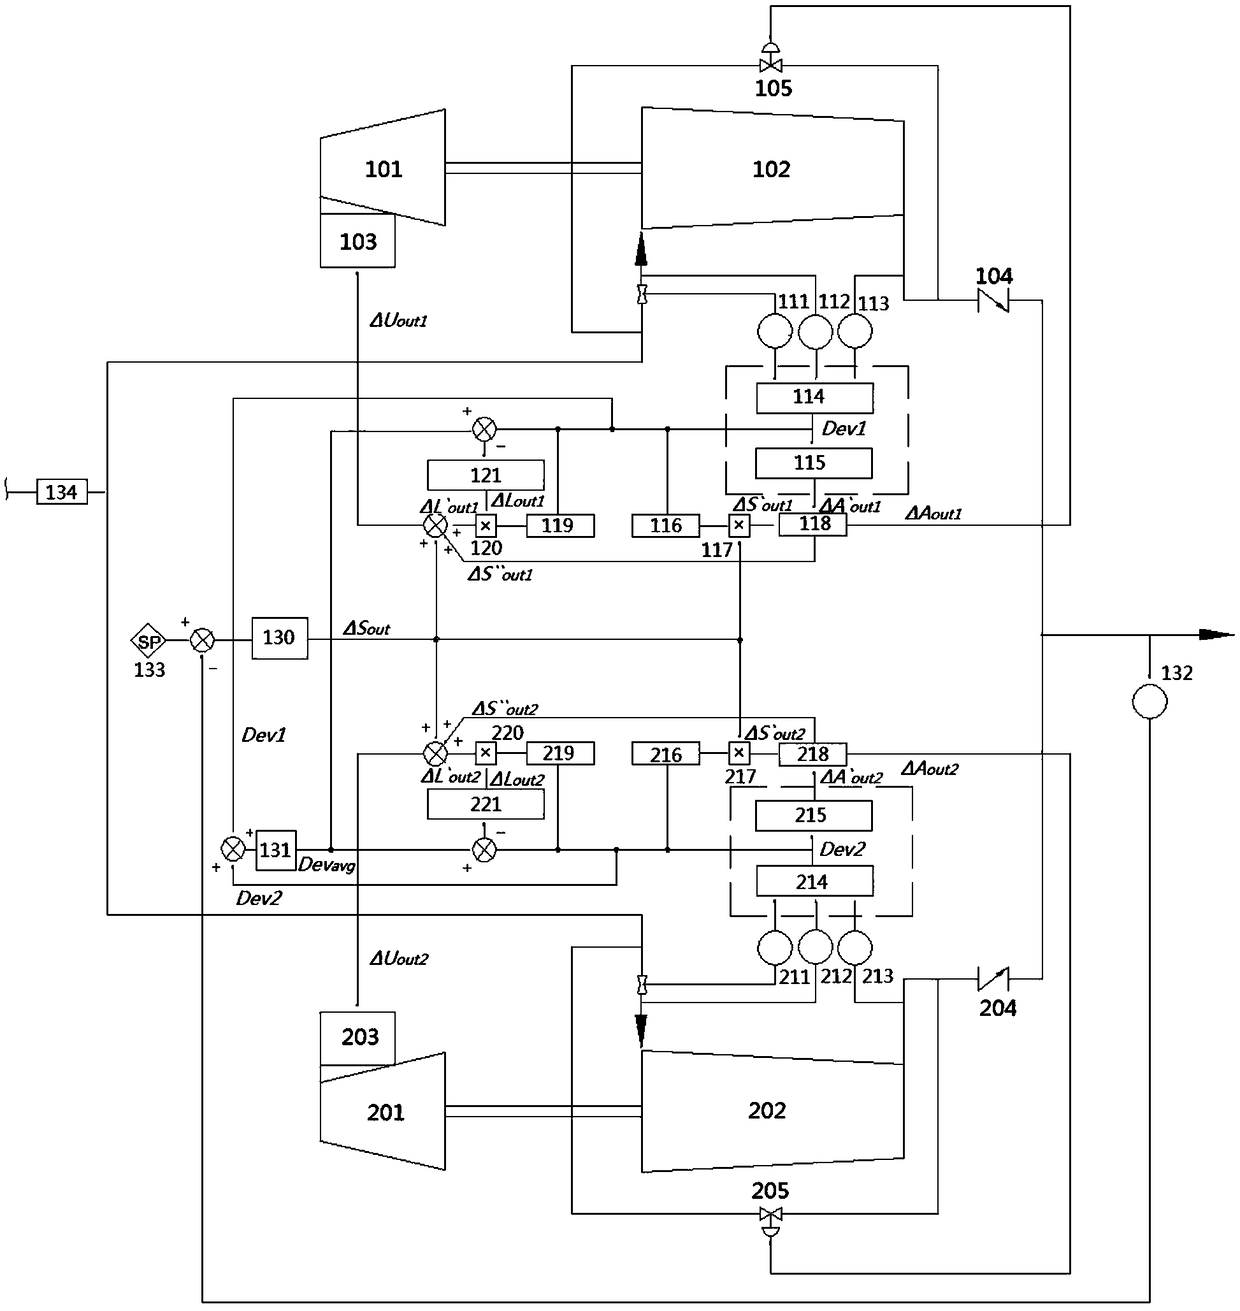 Control method and control system for turbine compressors operated in parallel